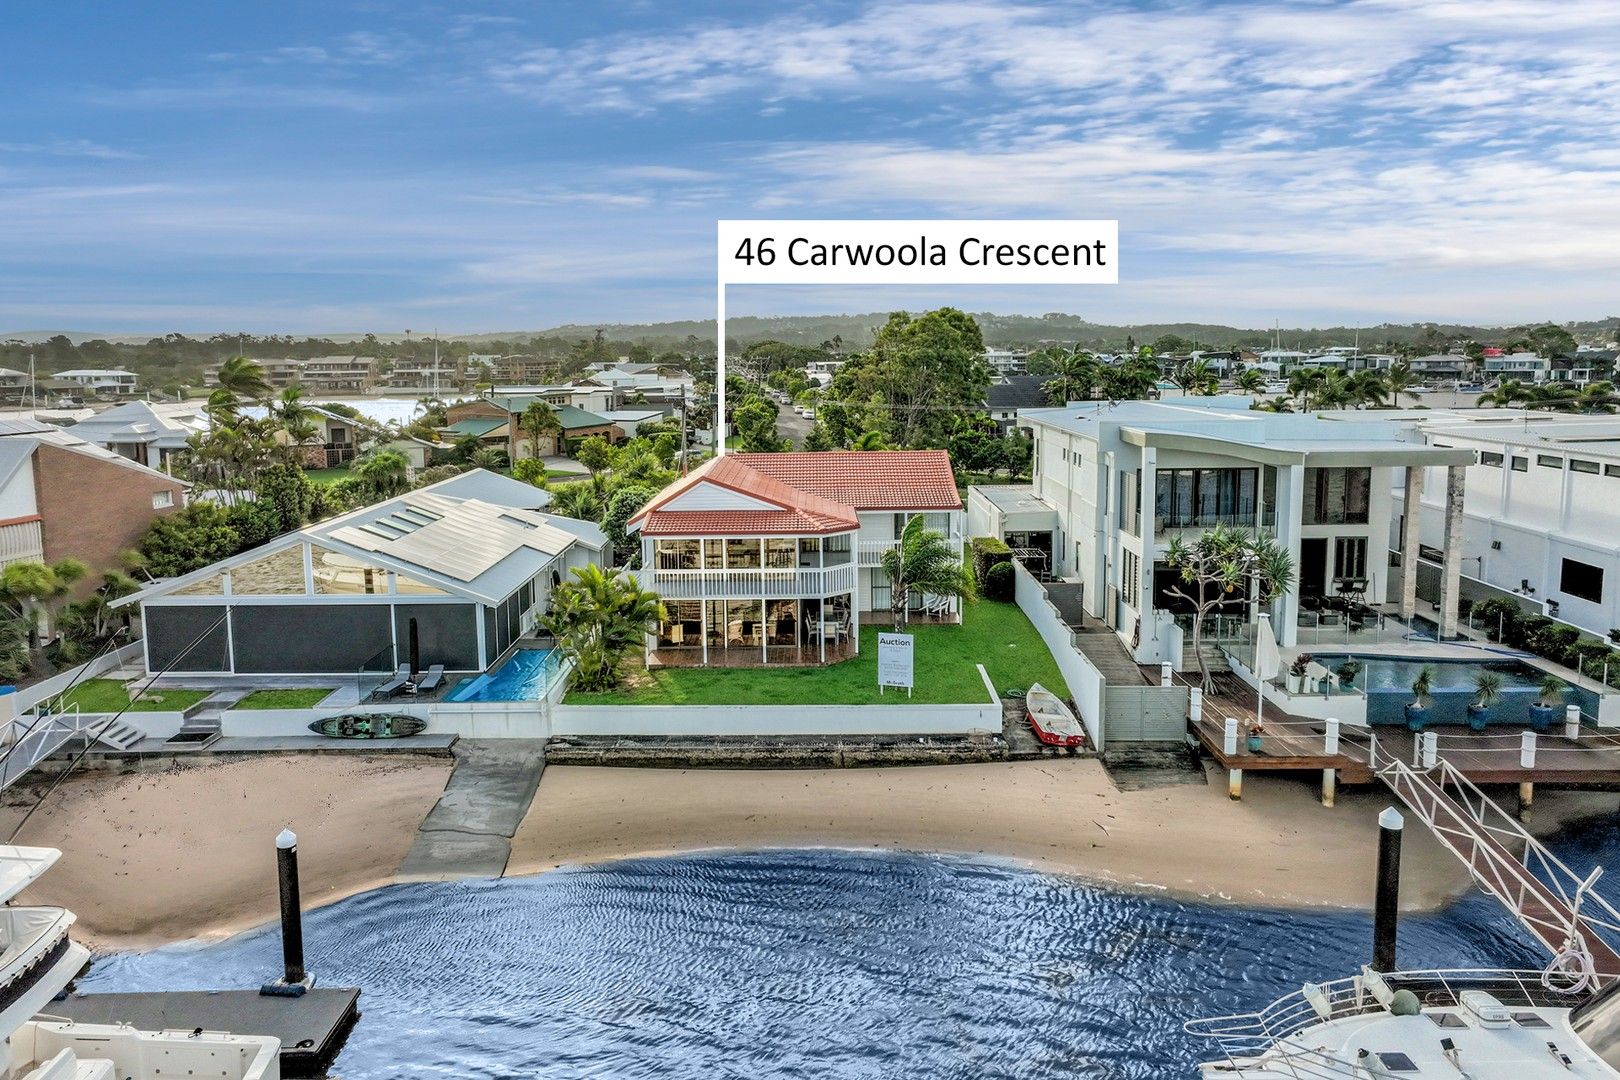 4 bedrooms House in 46 Carwoola Crescent MOOLOOLABA QLD, 4557